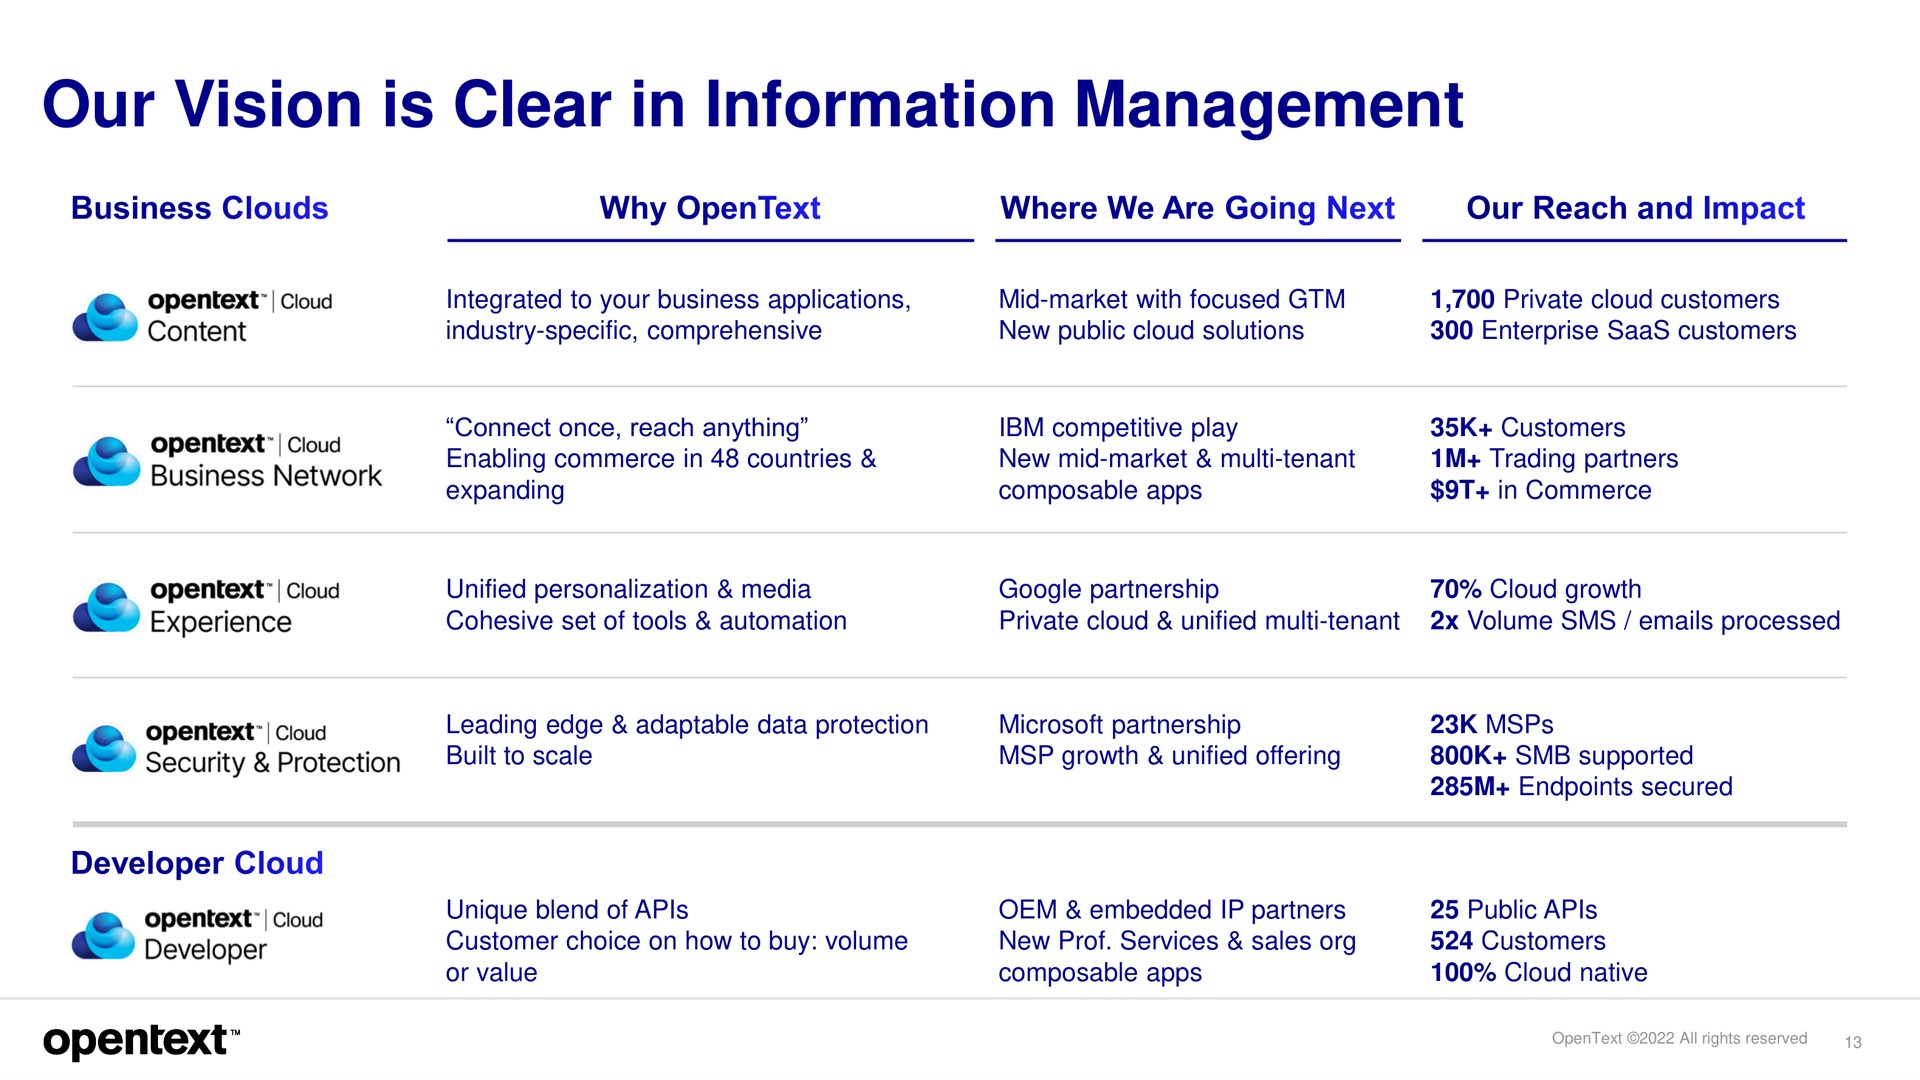 our vision is clear in information management | OpenText